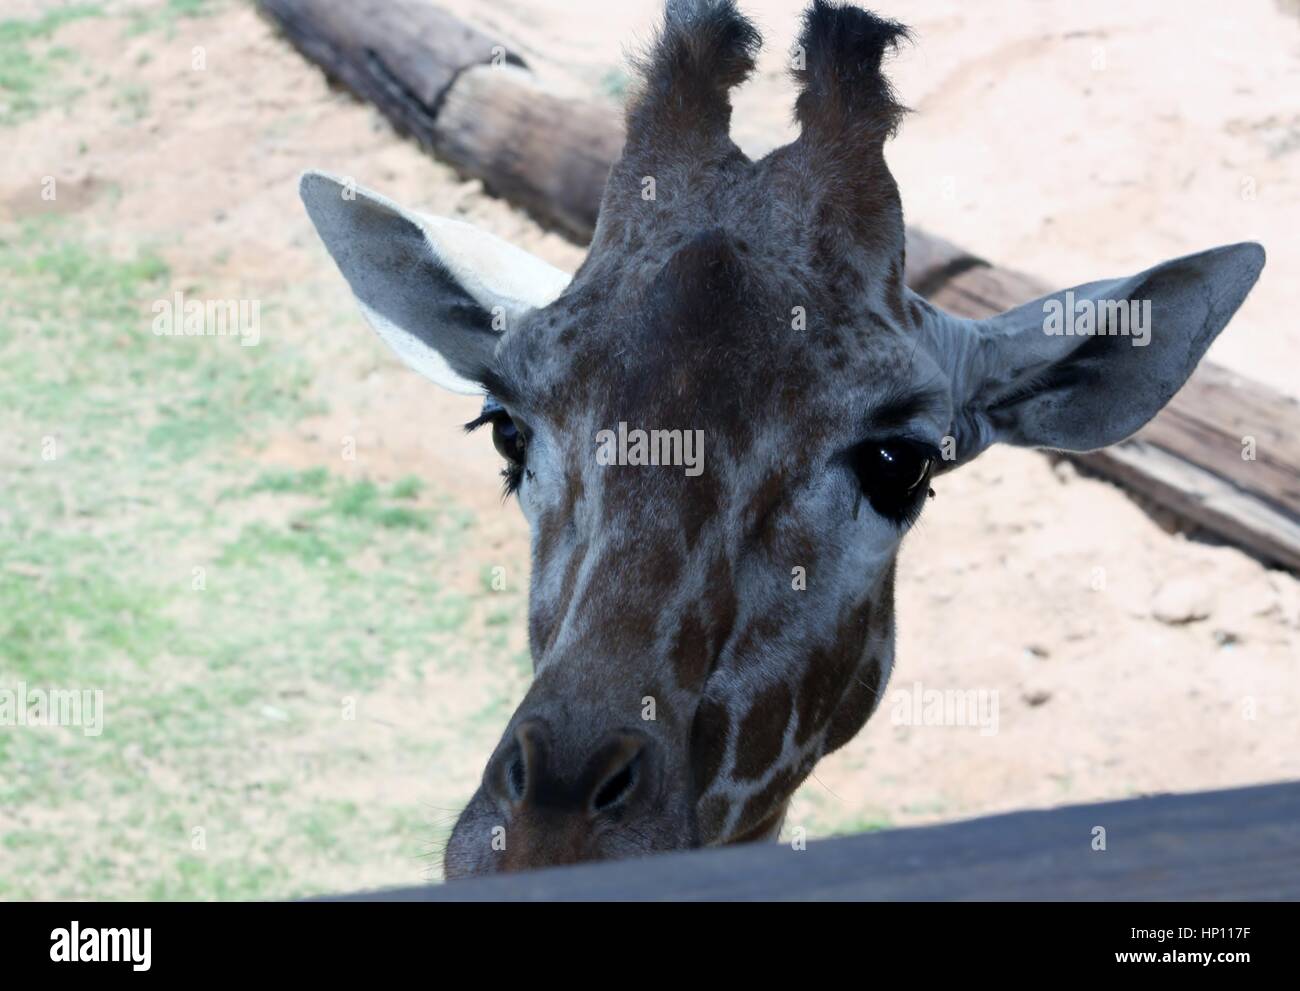 This is a fairly young giraffe only his head exposed beautiful eyes gentle look.wildlife zoo Arizona Stock Photo